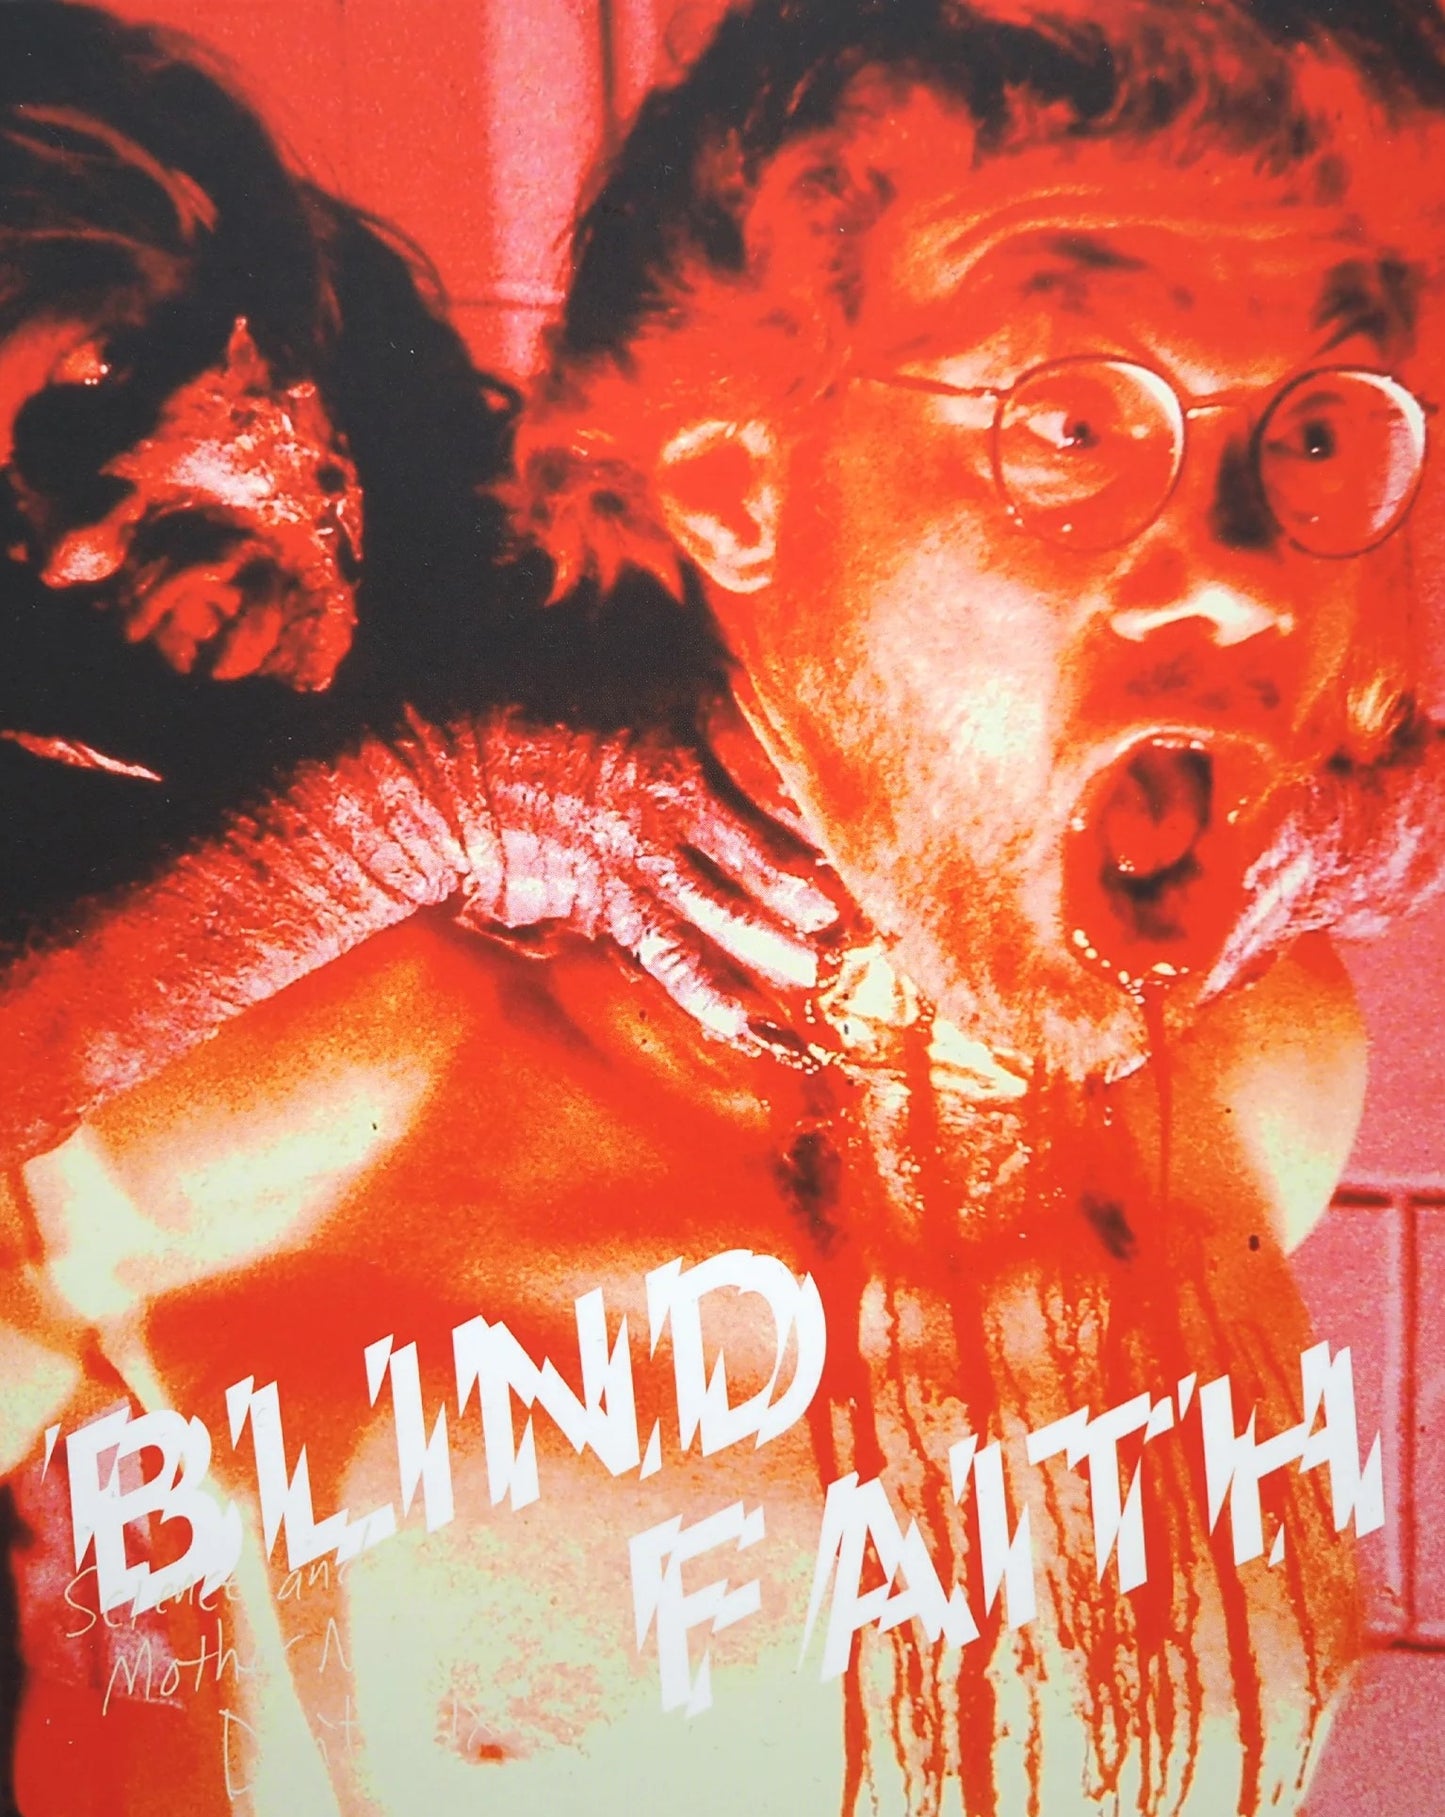 Blind Faith Limited Edition VHShitfest Blu-Ray [PRE-ORDER] [SLIPCOVER]